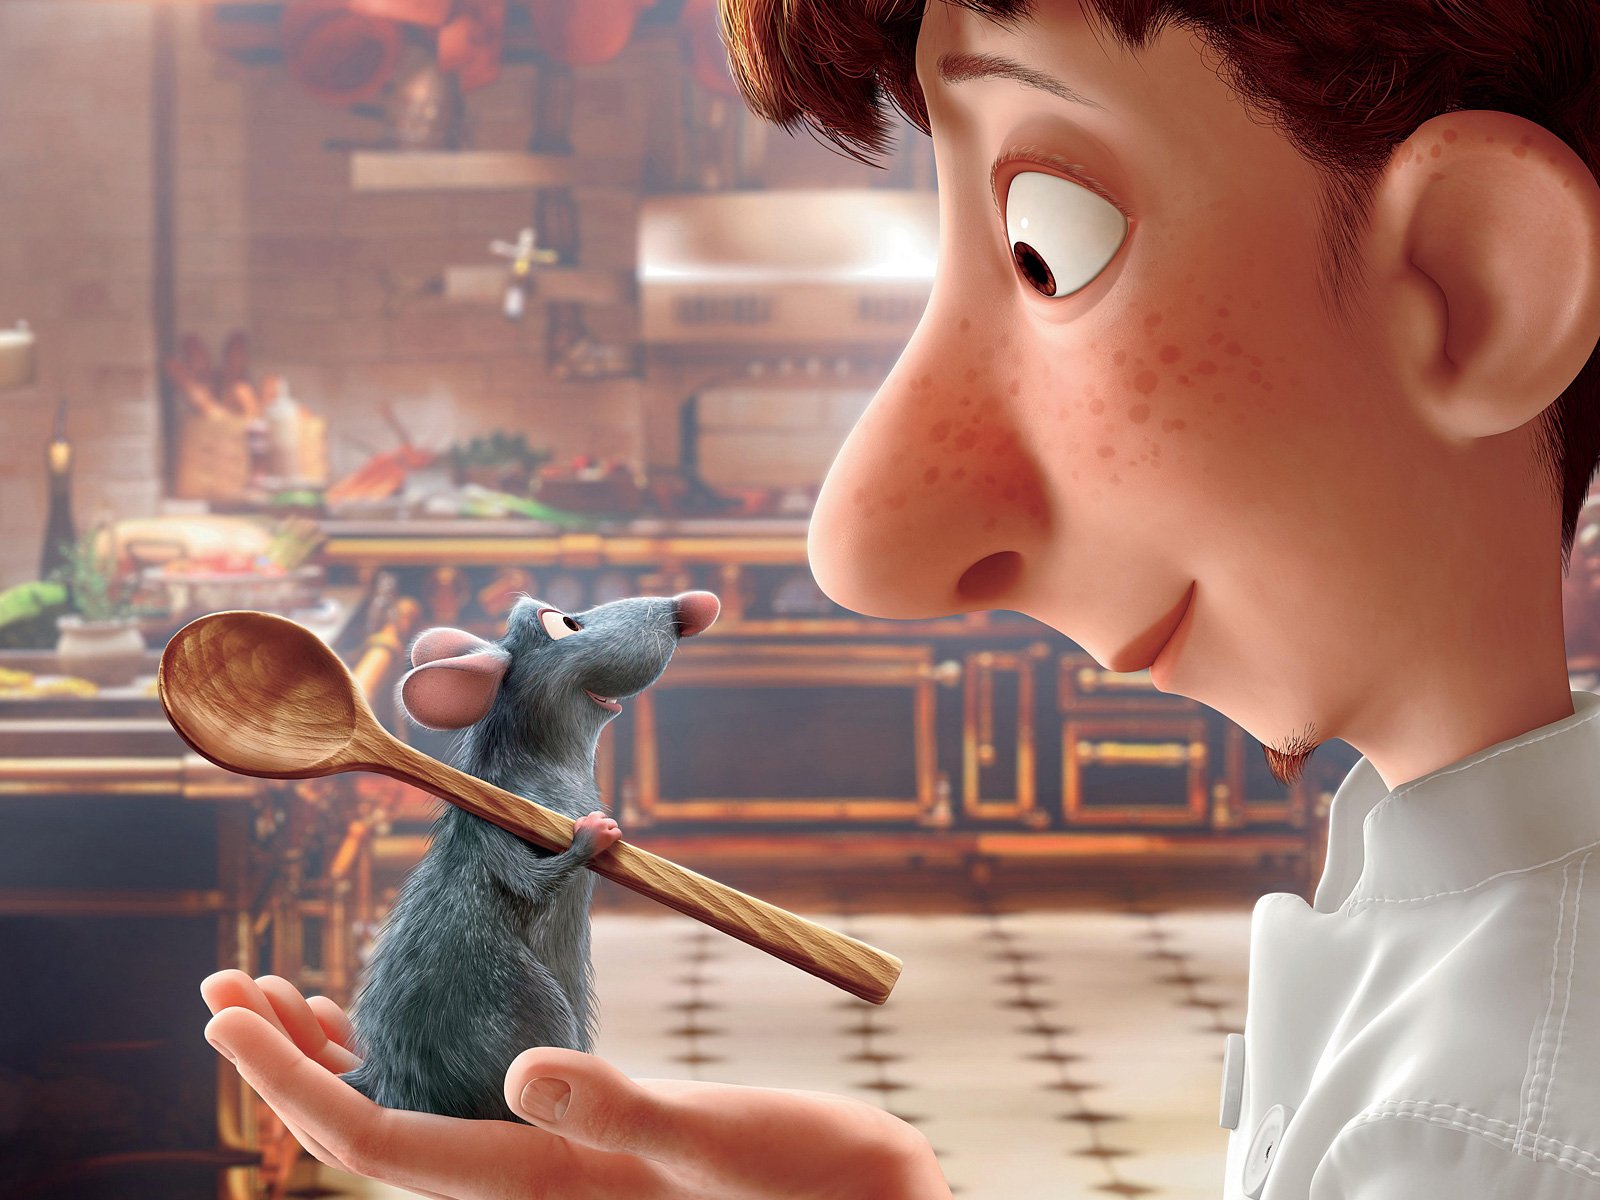 Most Disney Fans Can’t Identify More Than 15/18 of These Movie Foods – Can You? Ratatouille